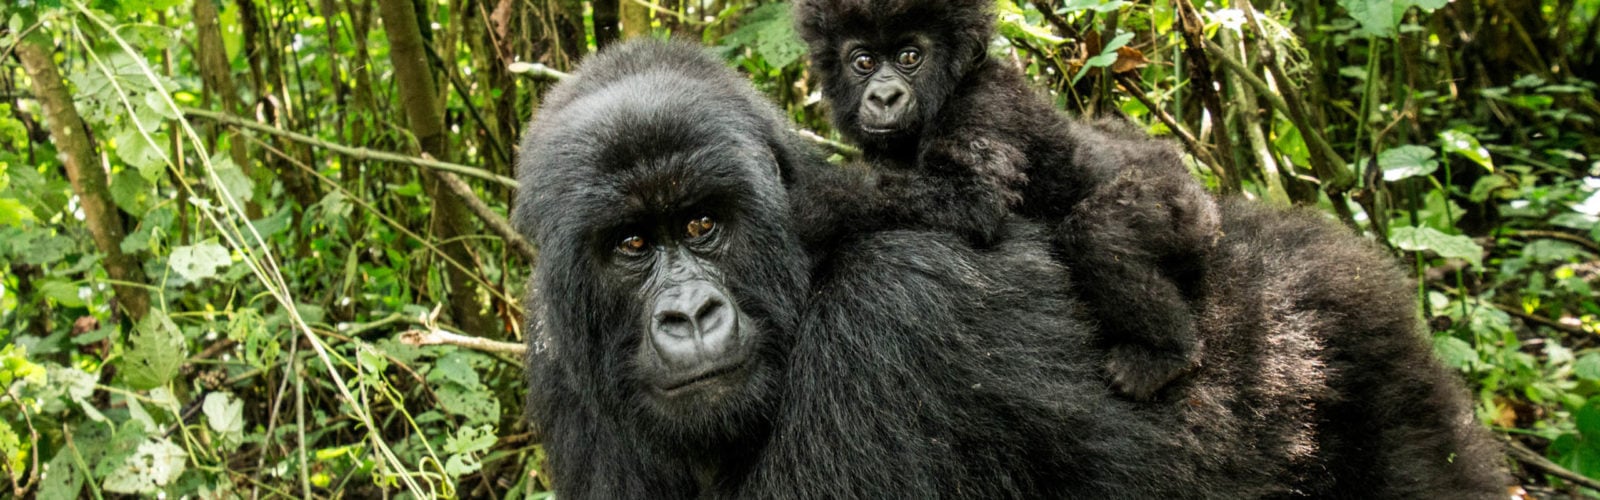 Mother Mountain gorilla with baby